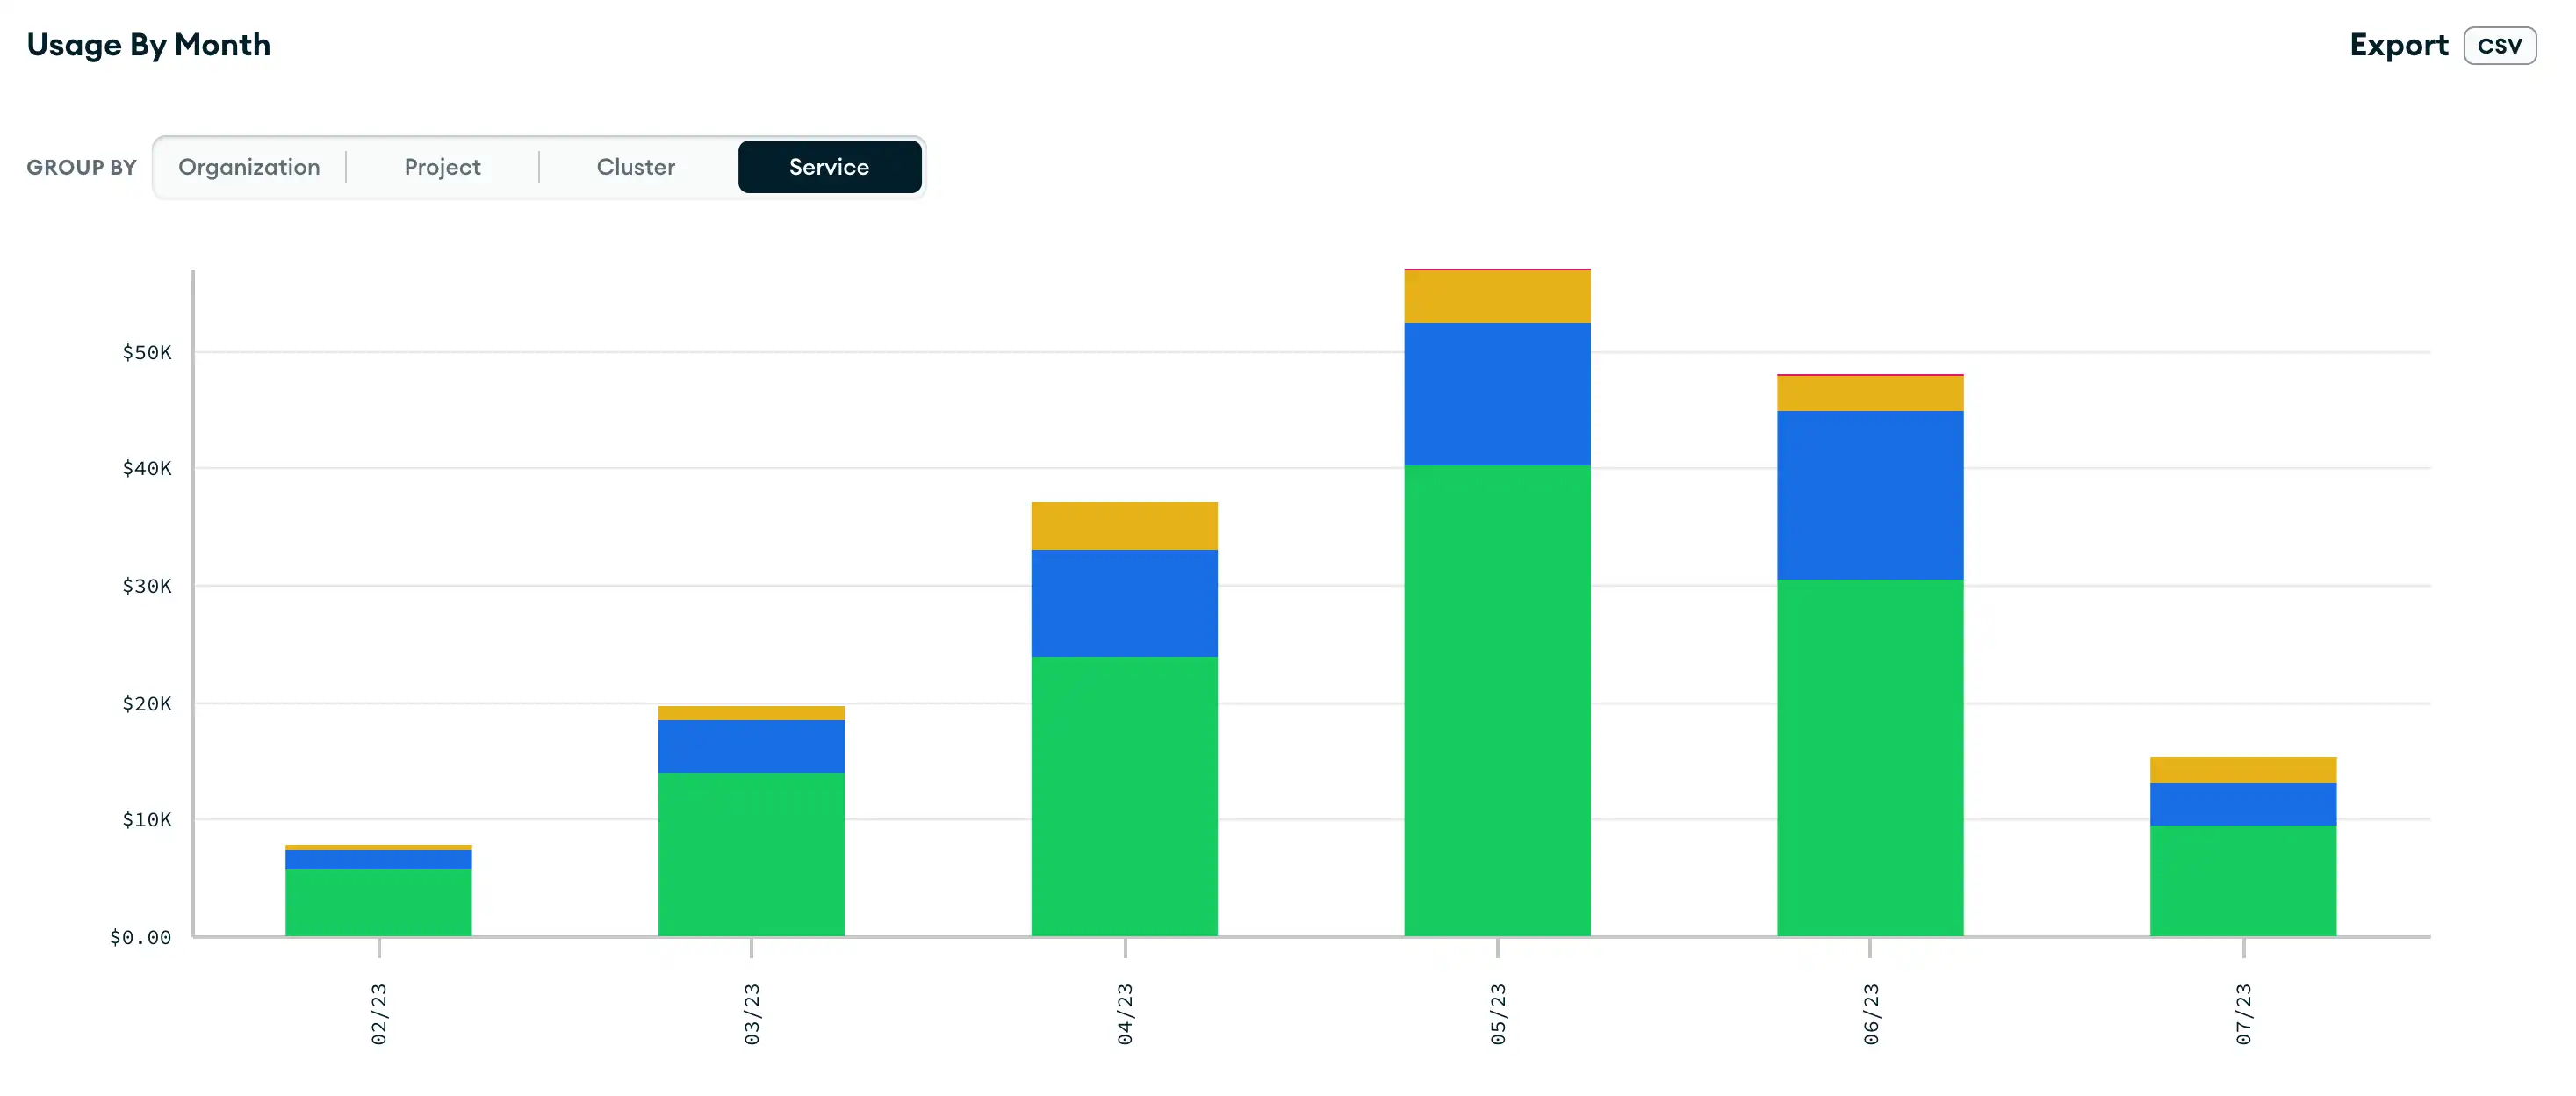 Bar chart displaying the monthly usage grouped by service for the past six months.